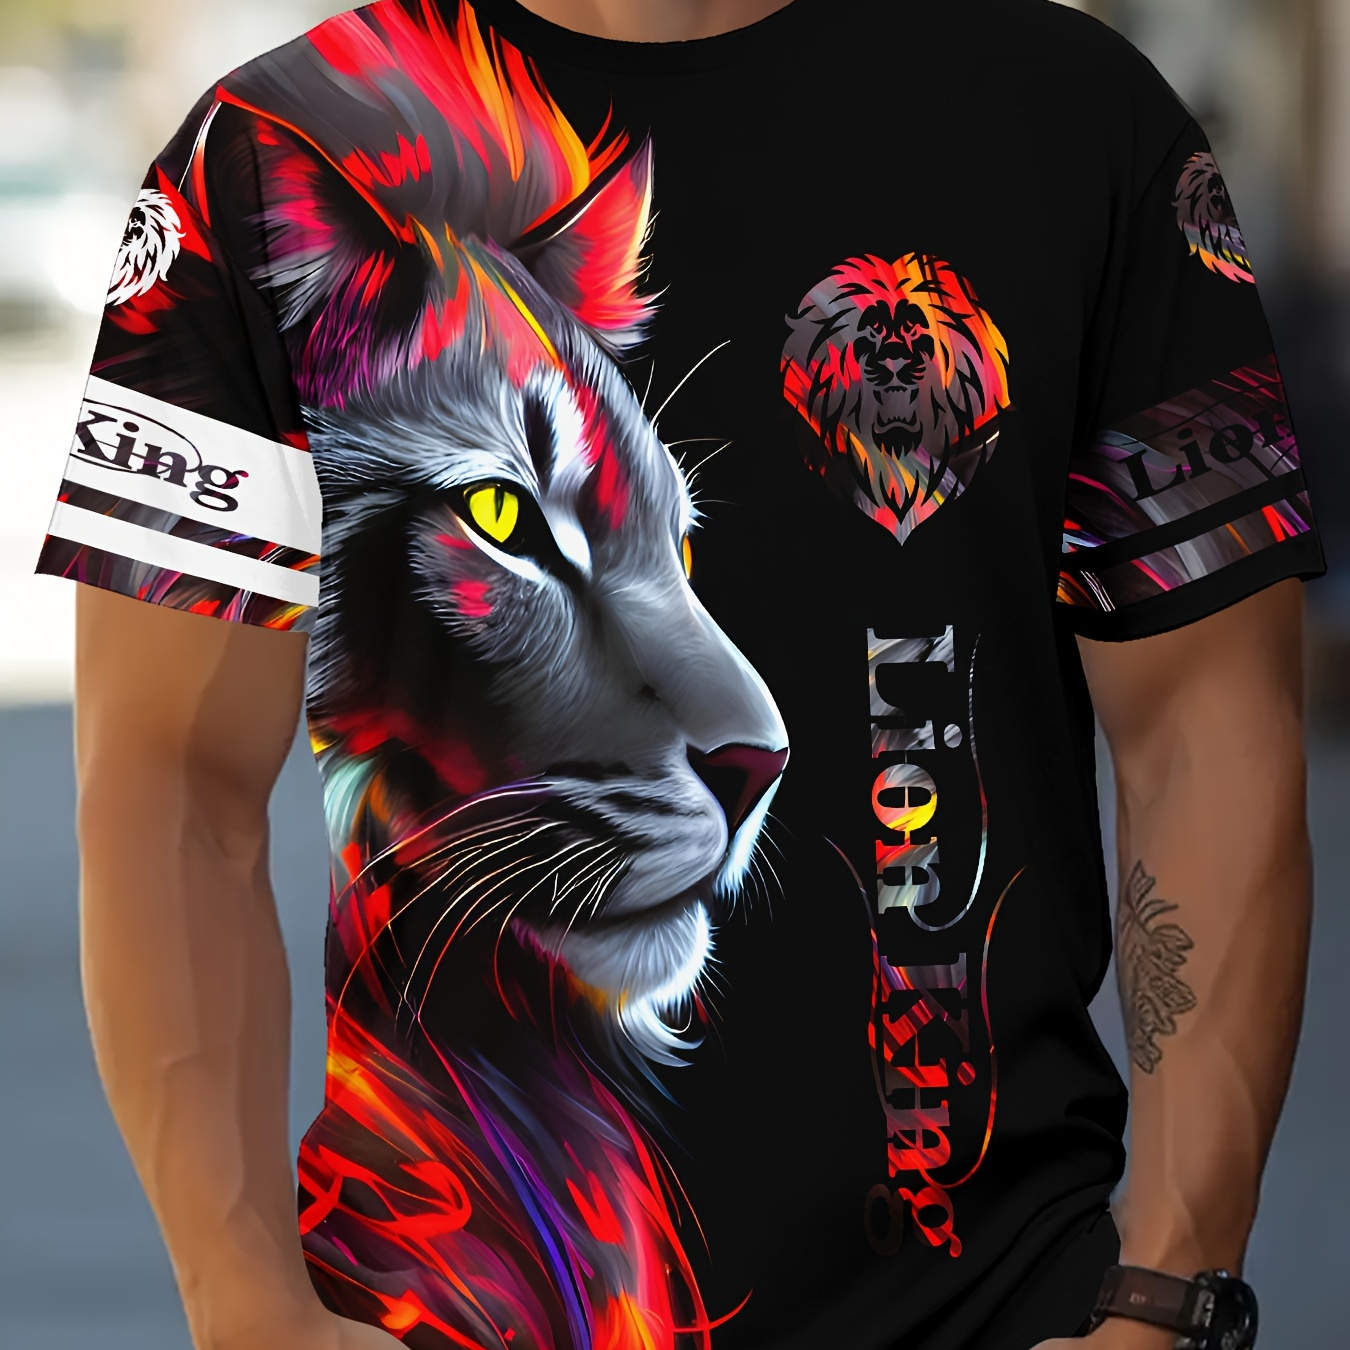 

Men's Lion Graphic Print T-shirt, Casual Short Sleeve Crew Neck Tee, Men's Clothing For Summer Outdoor